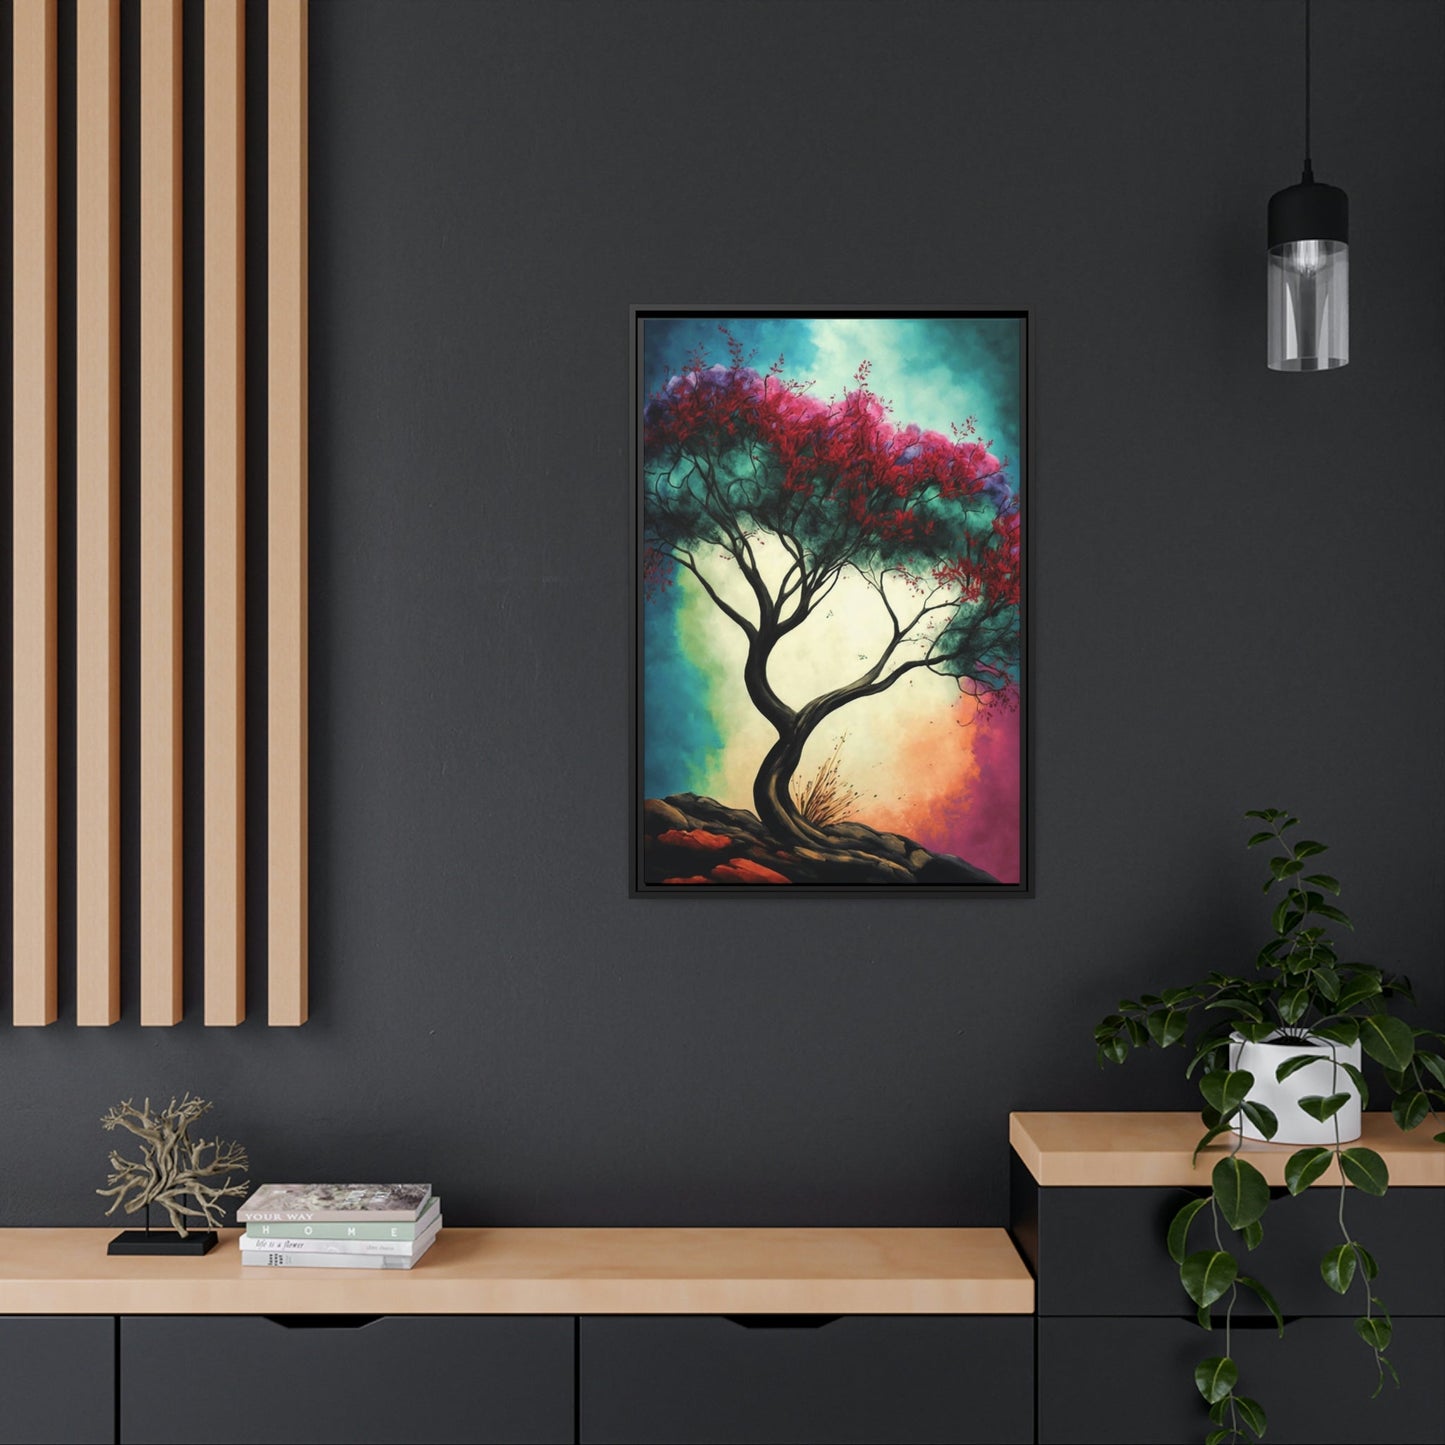 Majestic Horizons: A Natural Canvas & Poster Wall Art of Abstract Landscape